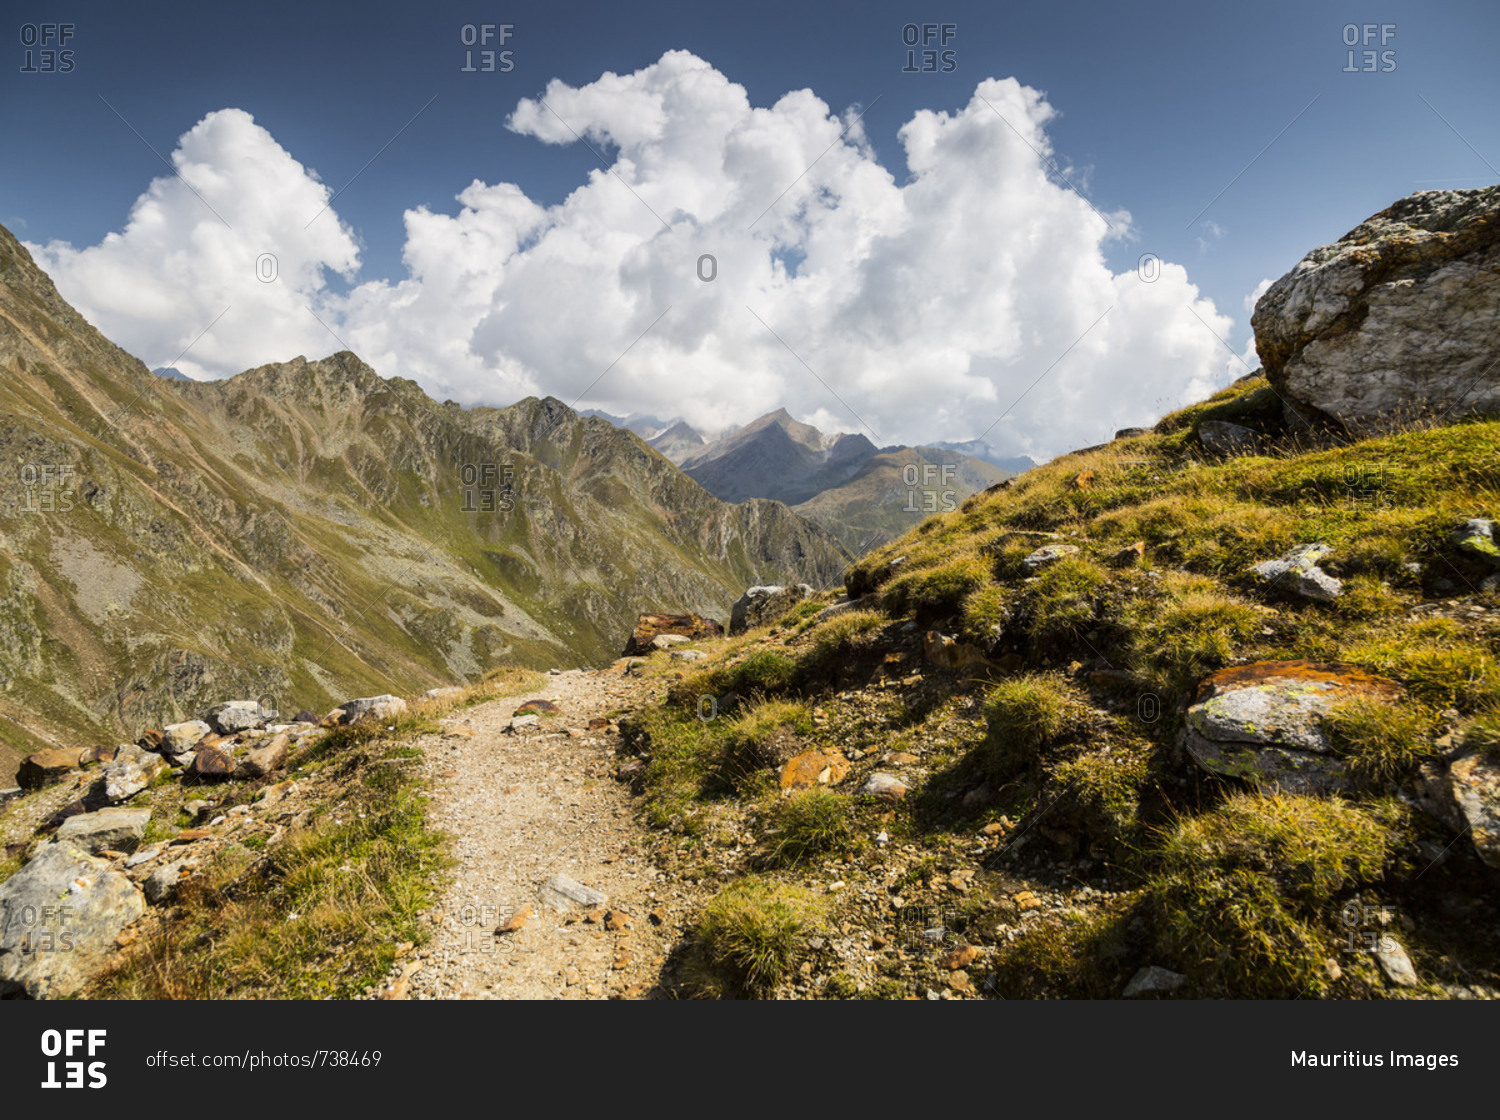 Europe, Austria/Italy, Alps, Mountains, View from Passo Rombo Timmelsjoch